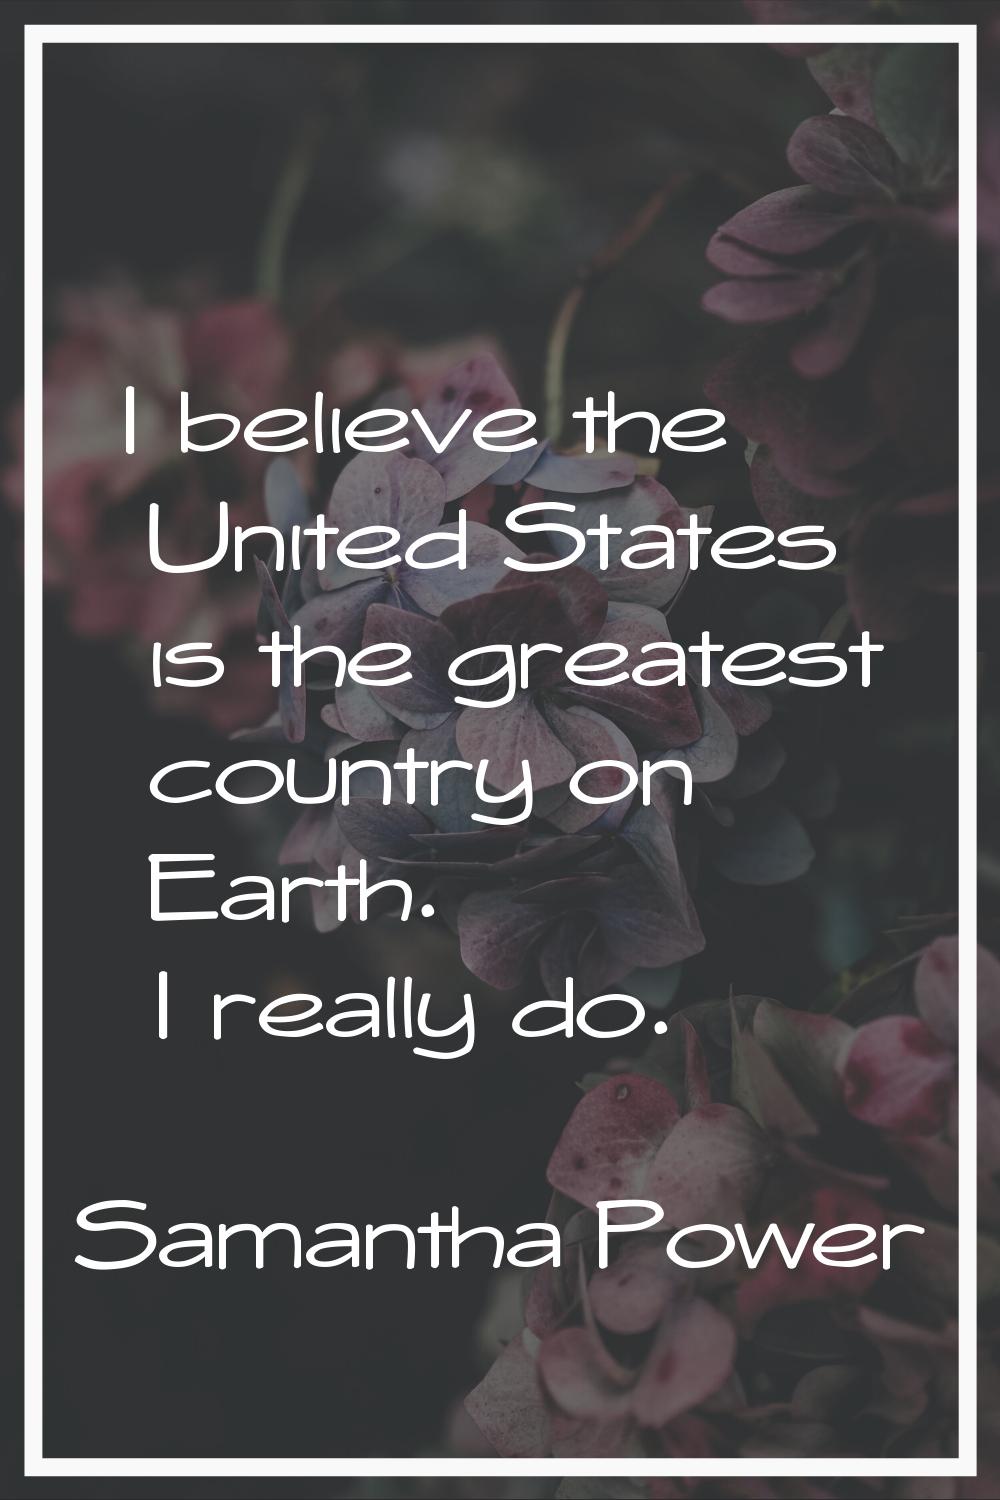 I believe the United States is the greatest country on Earth. I really do.